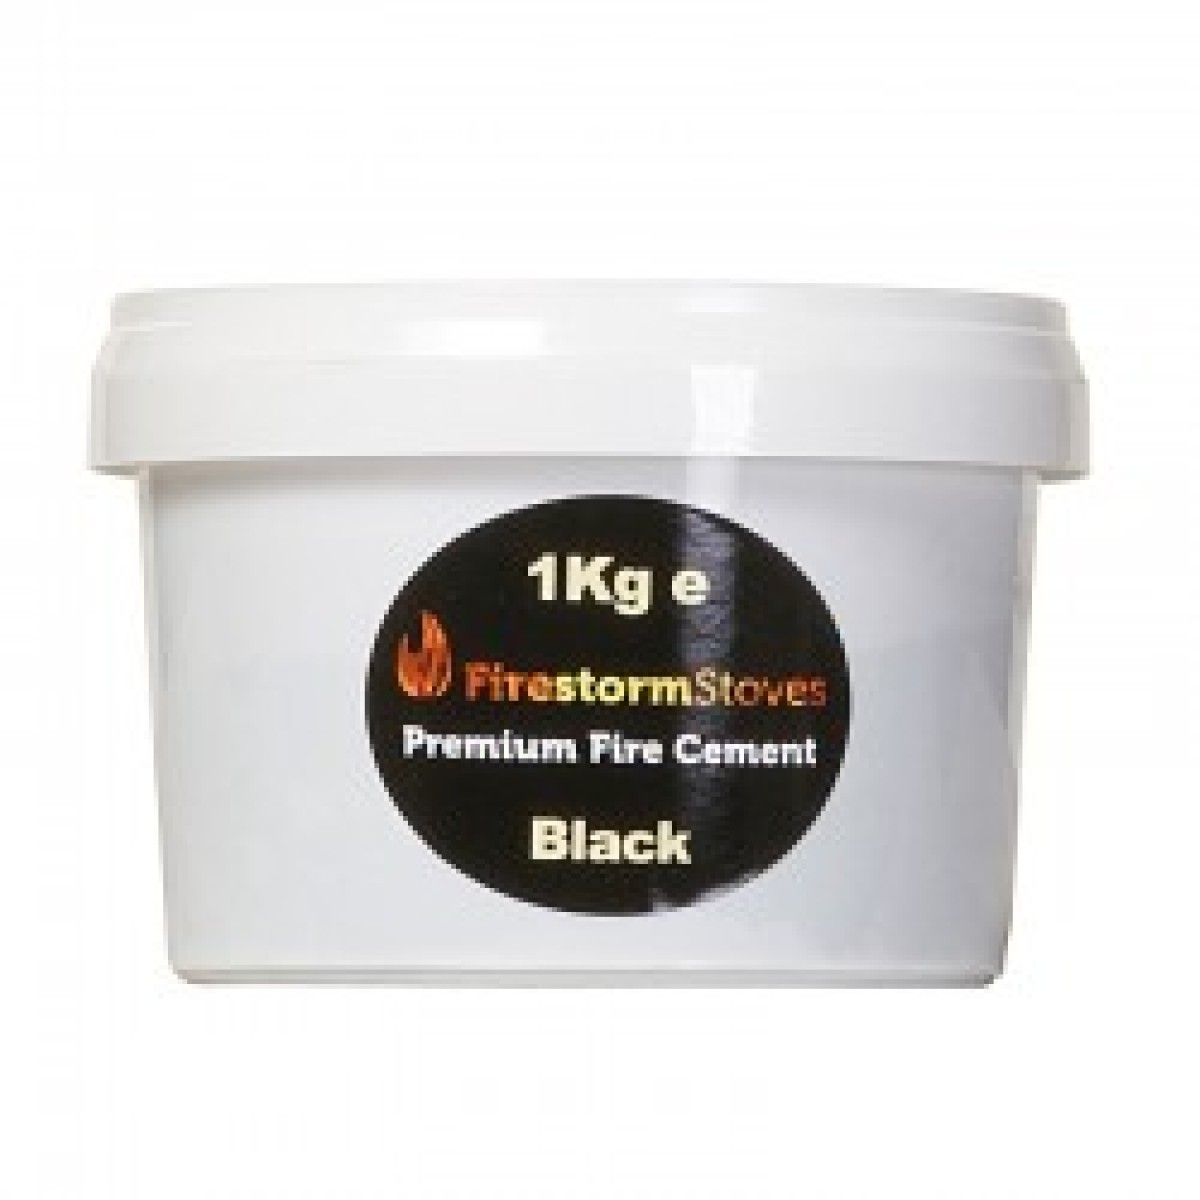 Premium Fire Cement - Linlithgow Stoves & Gifts